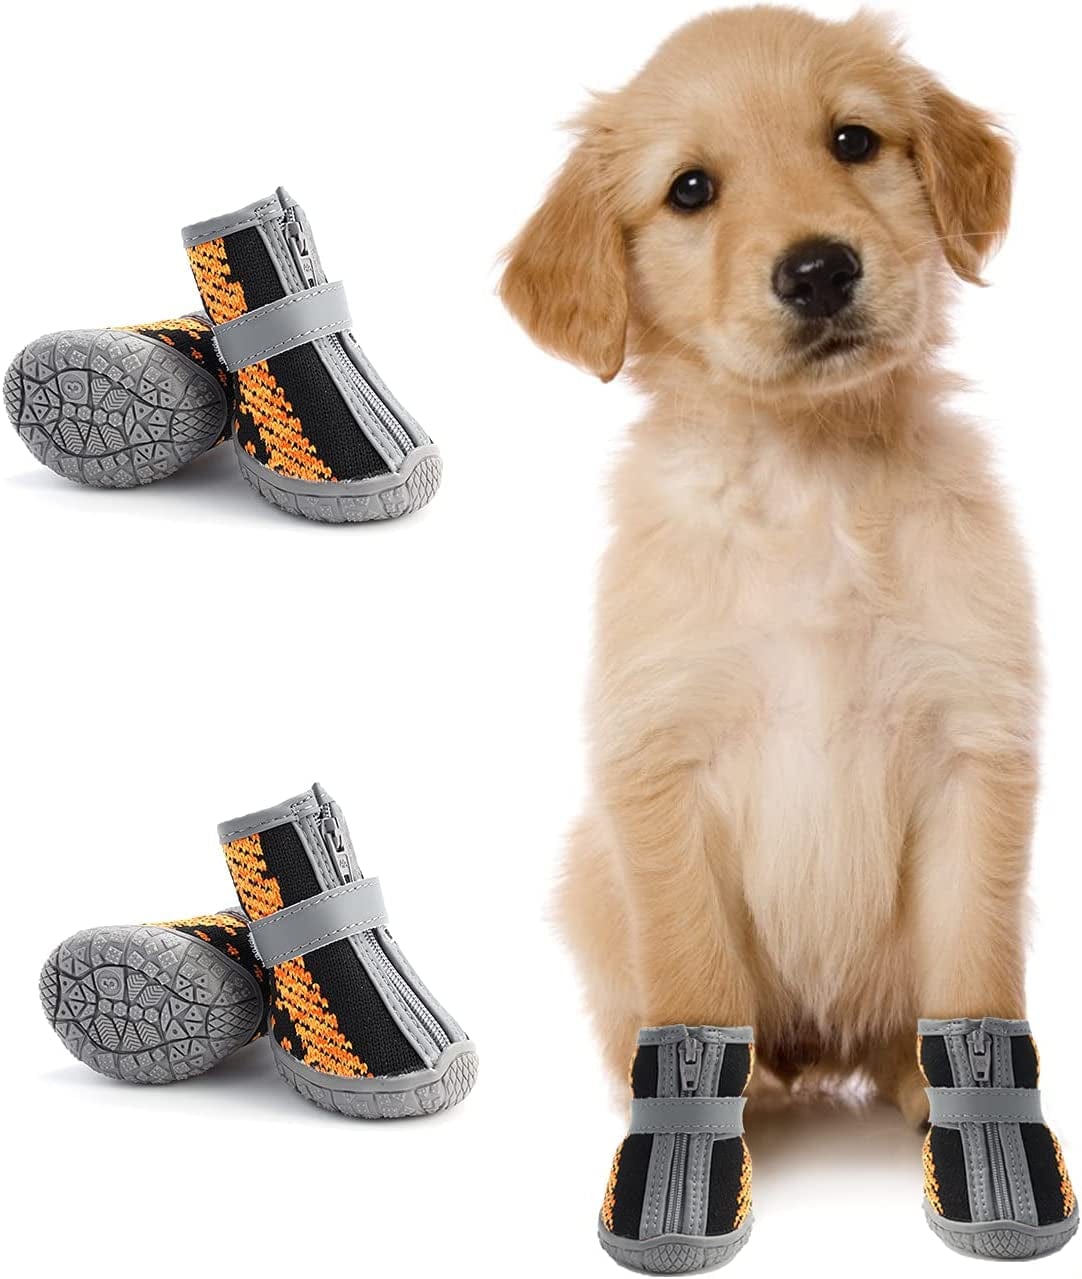 Dog Shoes for Hot Pavement Hardwood Floors, Breathable Dog Boots